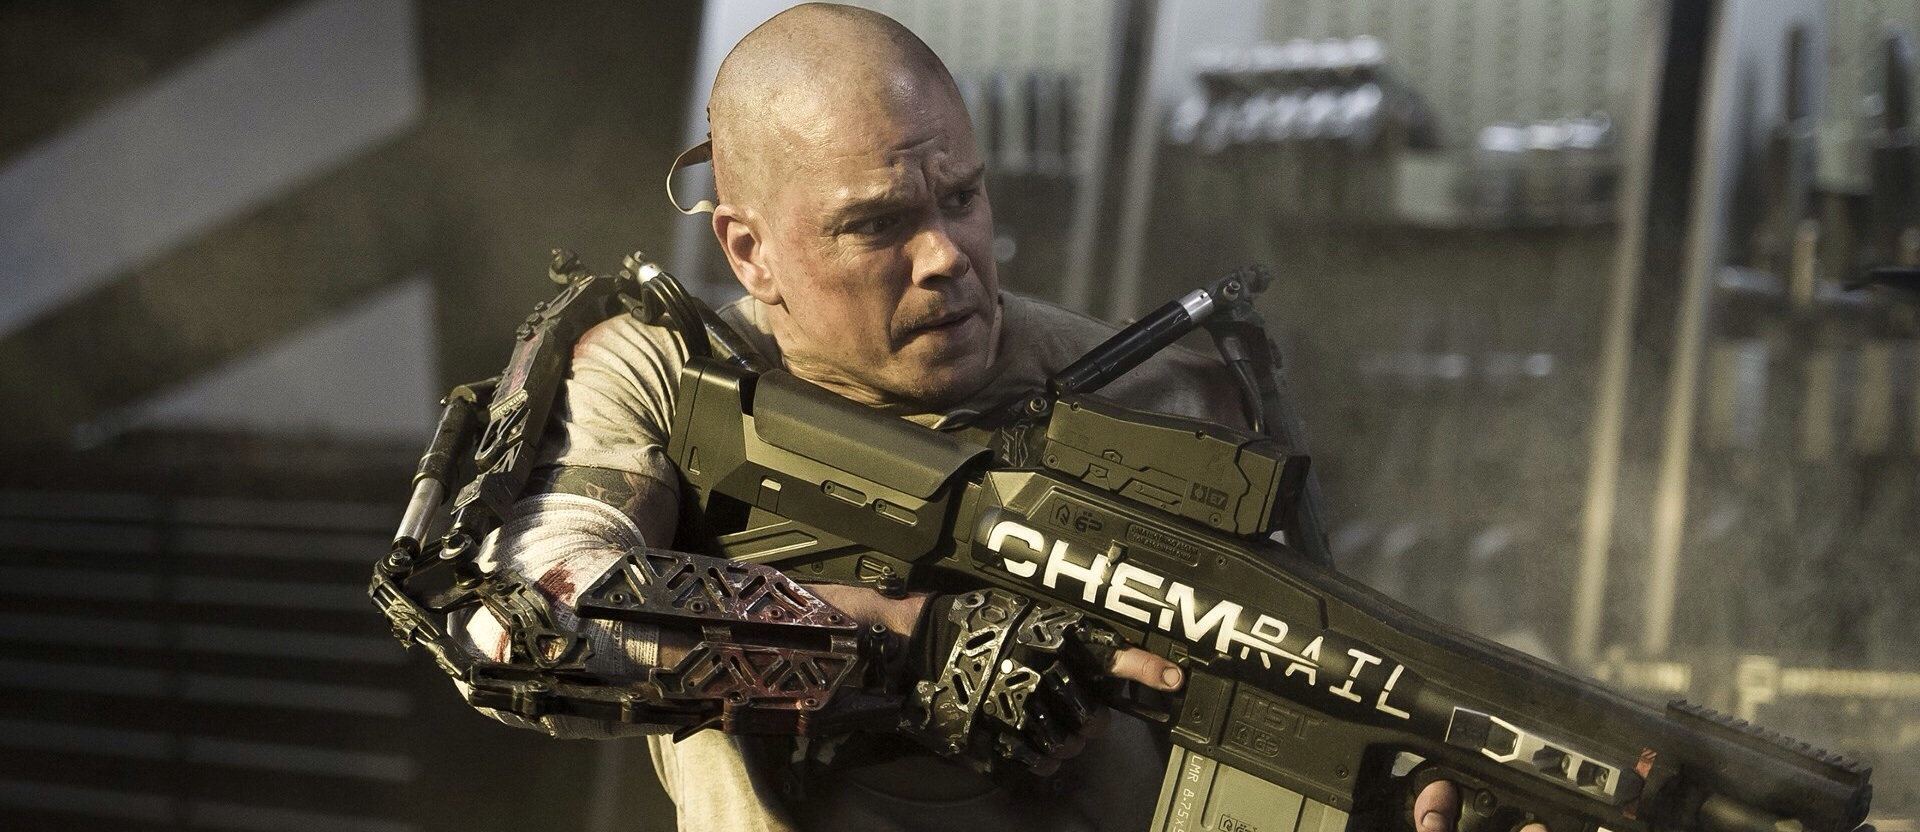 Elysium Blu-ray SteelBook will hit the UK the day after Christmas